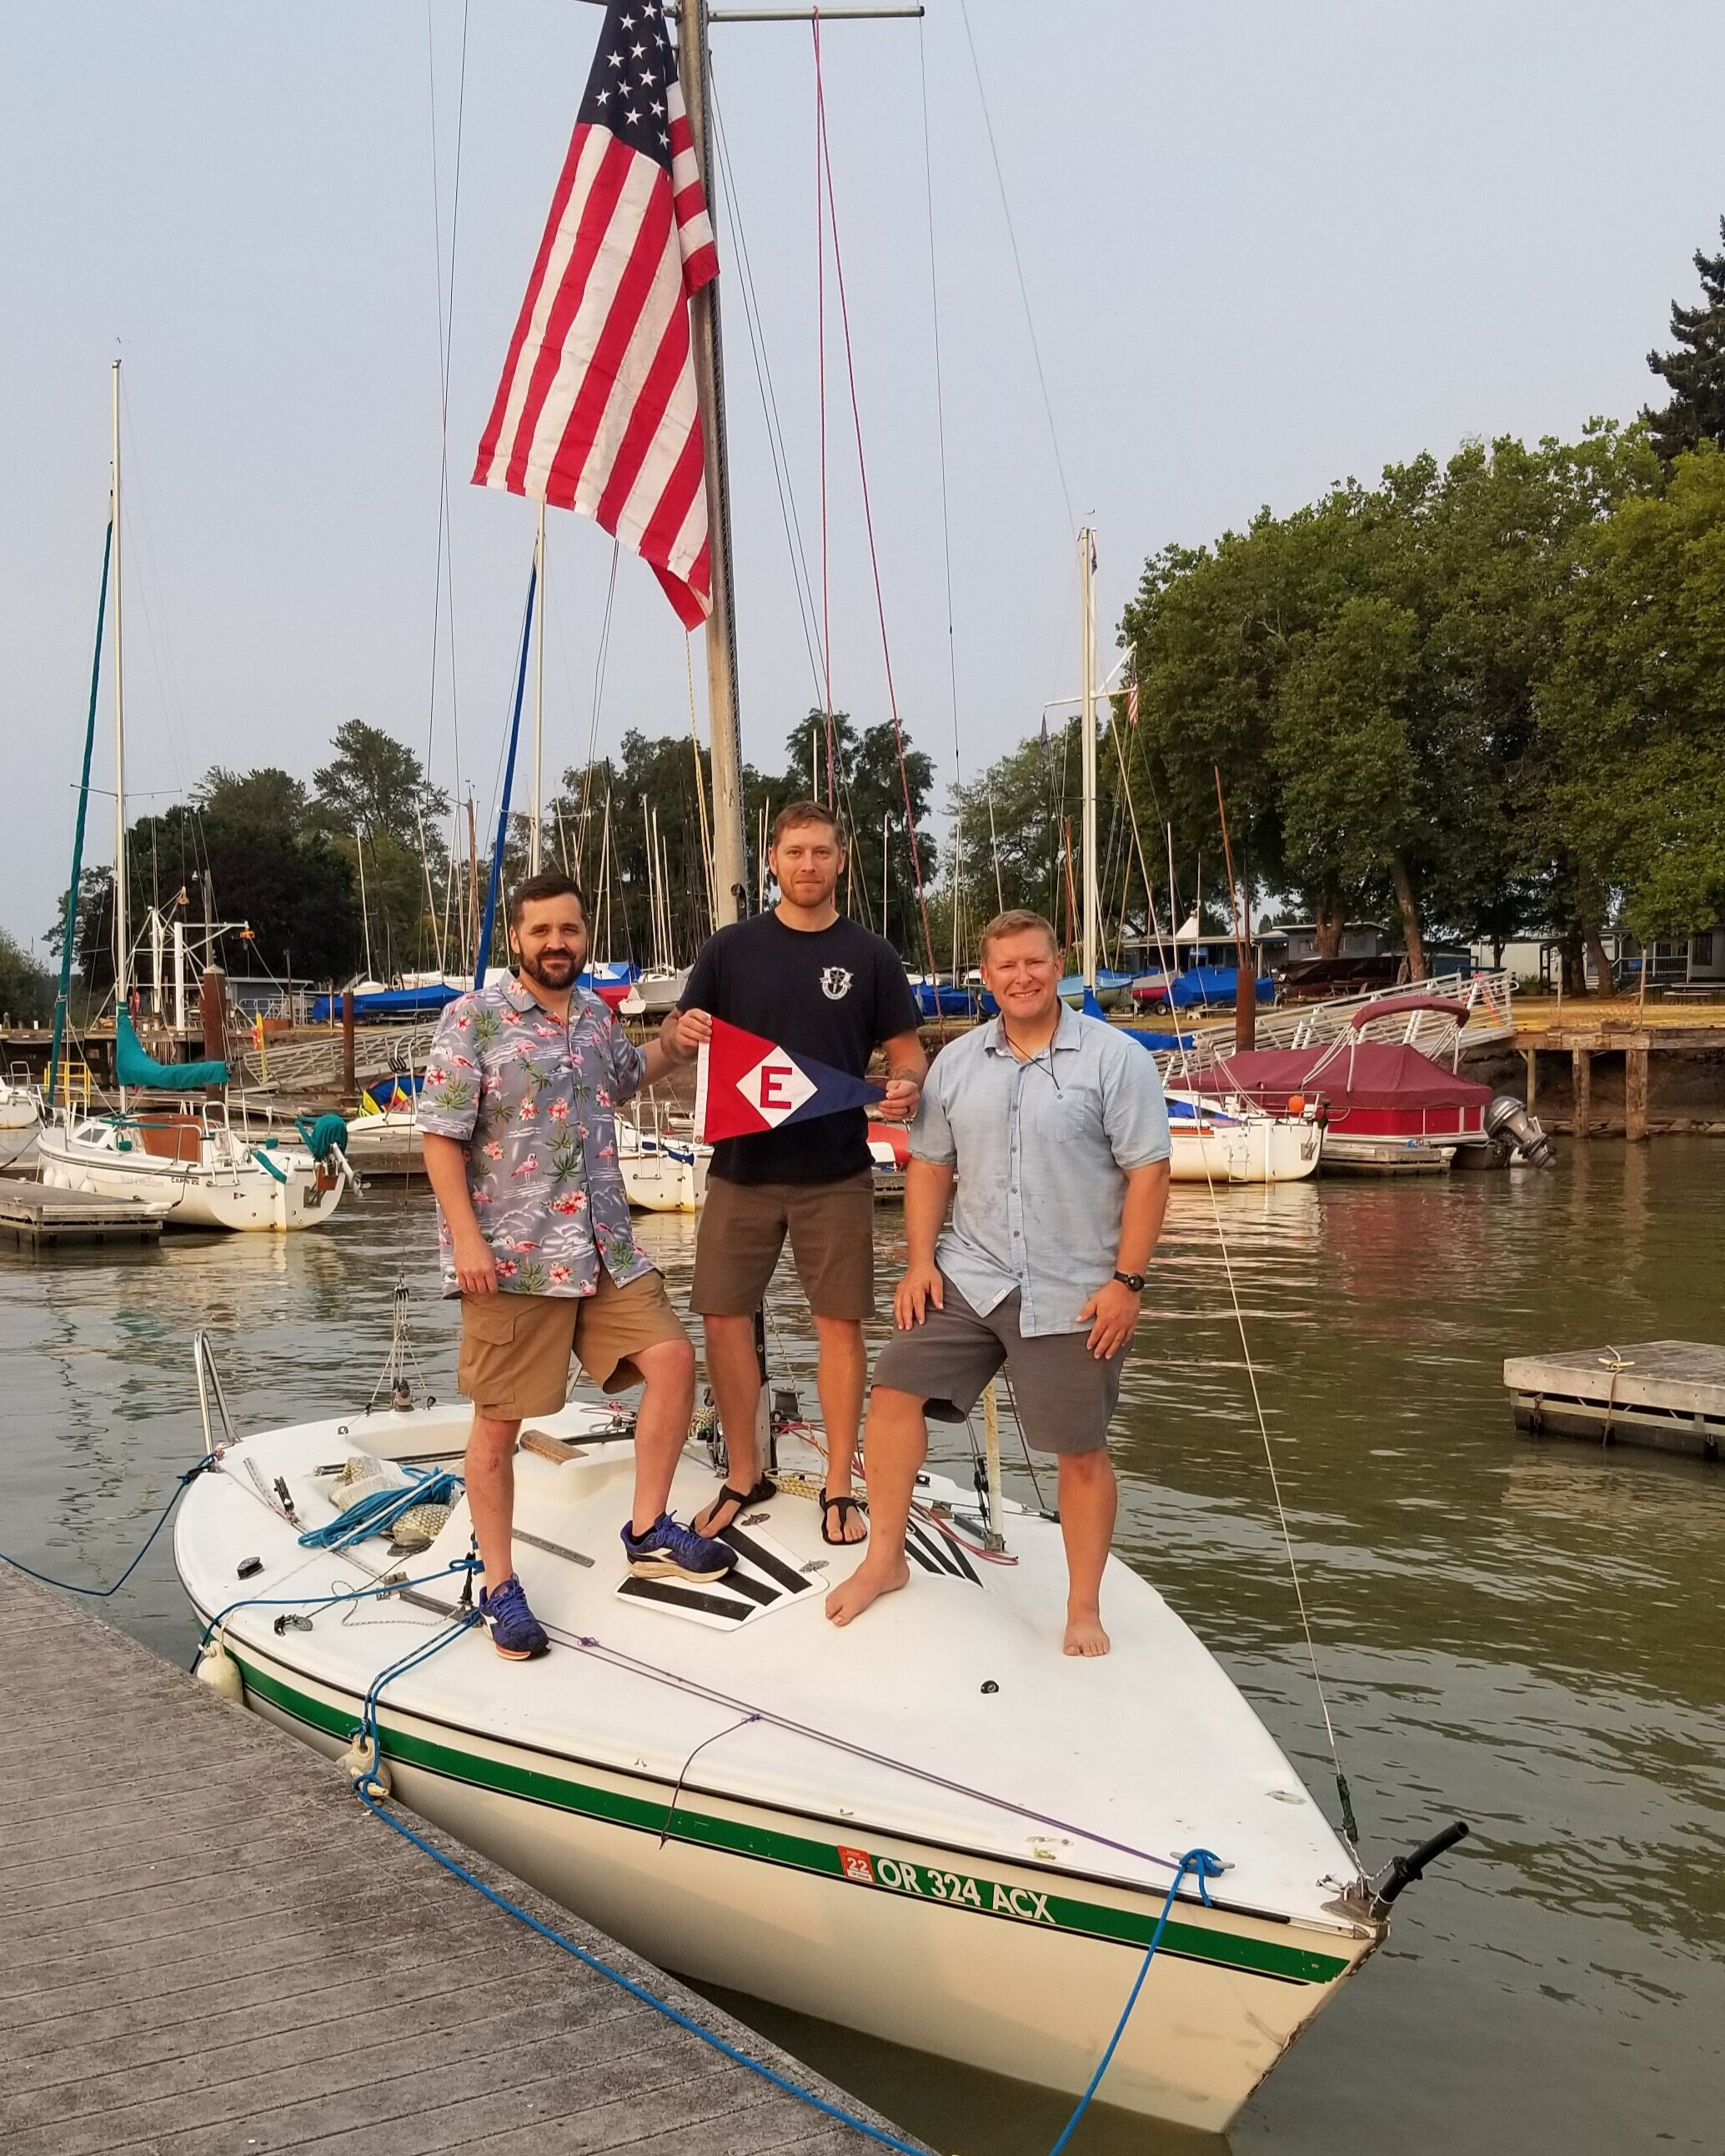  Michael, Joseph, and Andy show their pride during their 24-hour Sail-a-thon Fundraiser for Reboot Recovery 